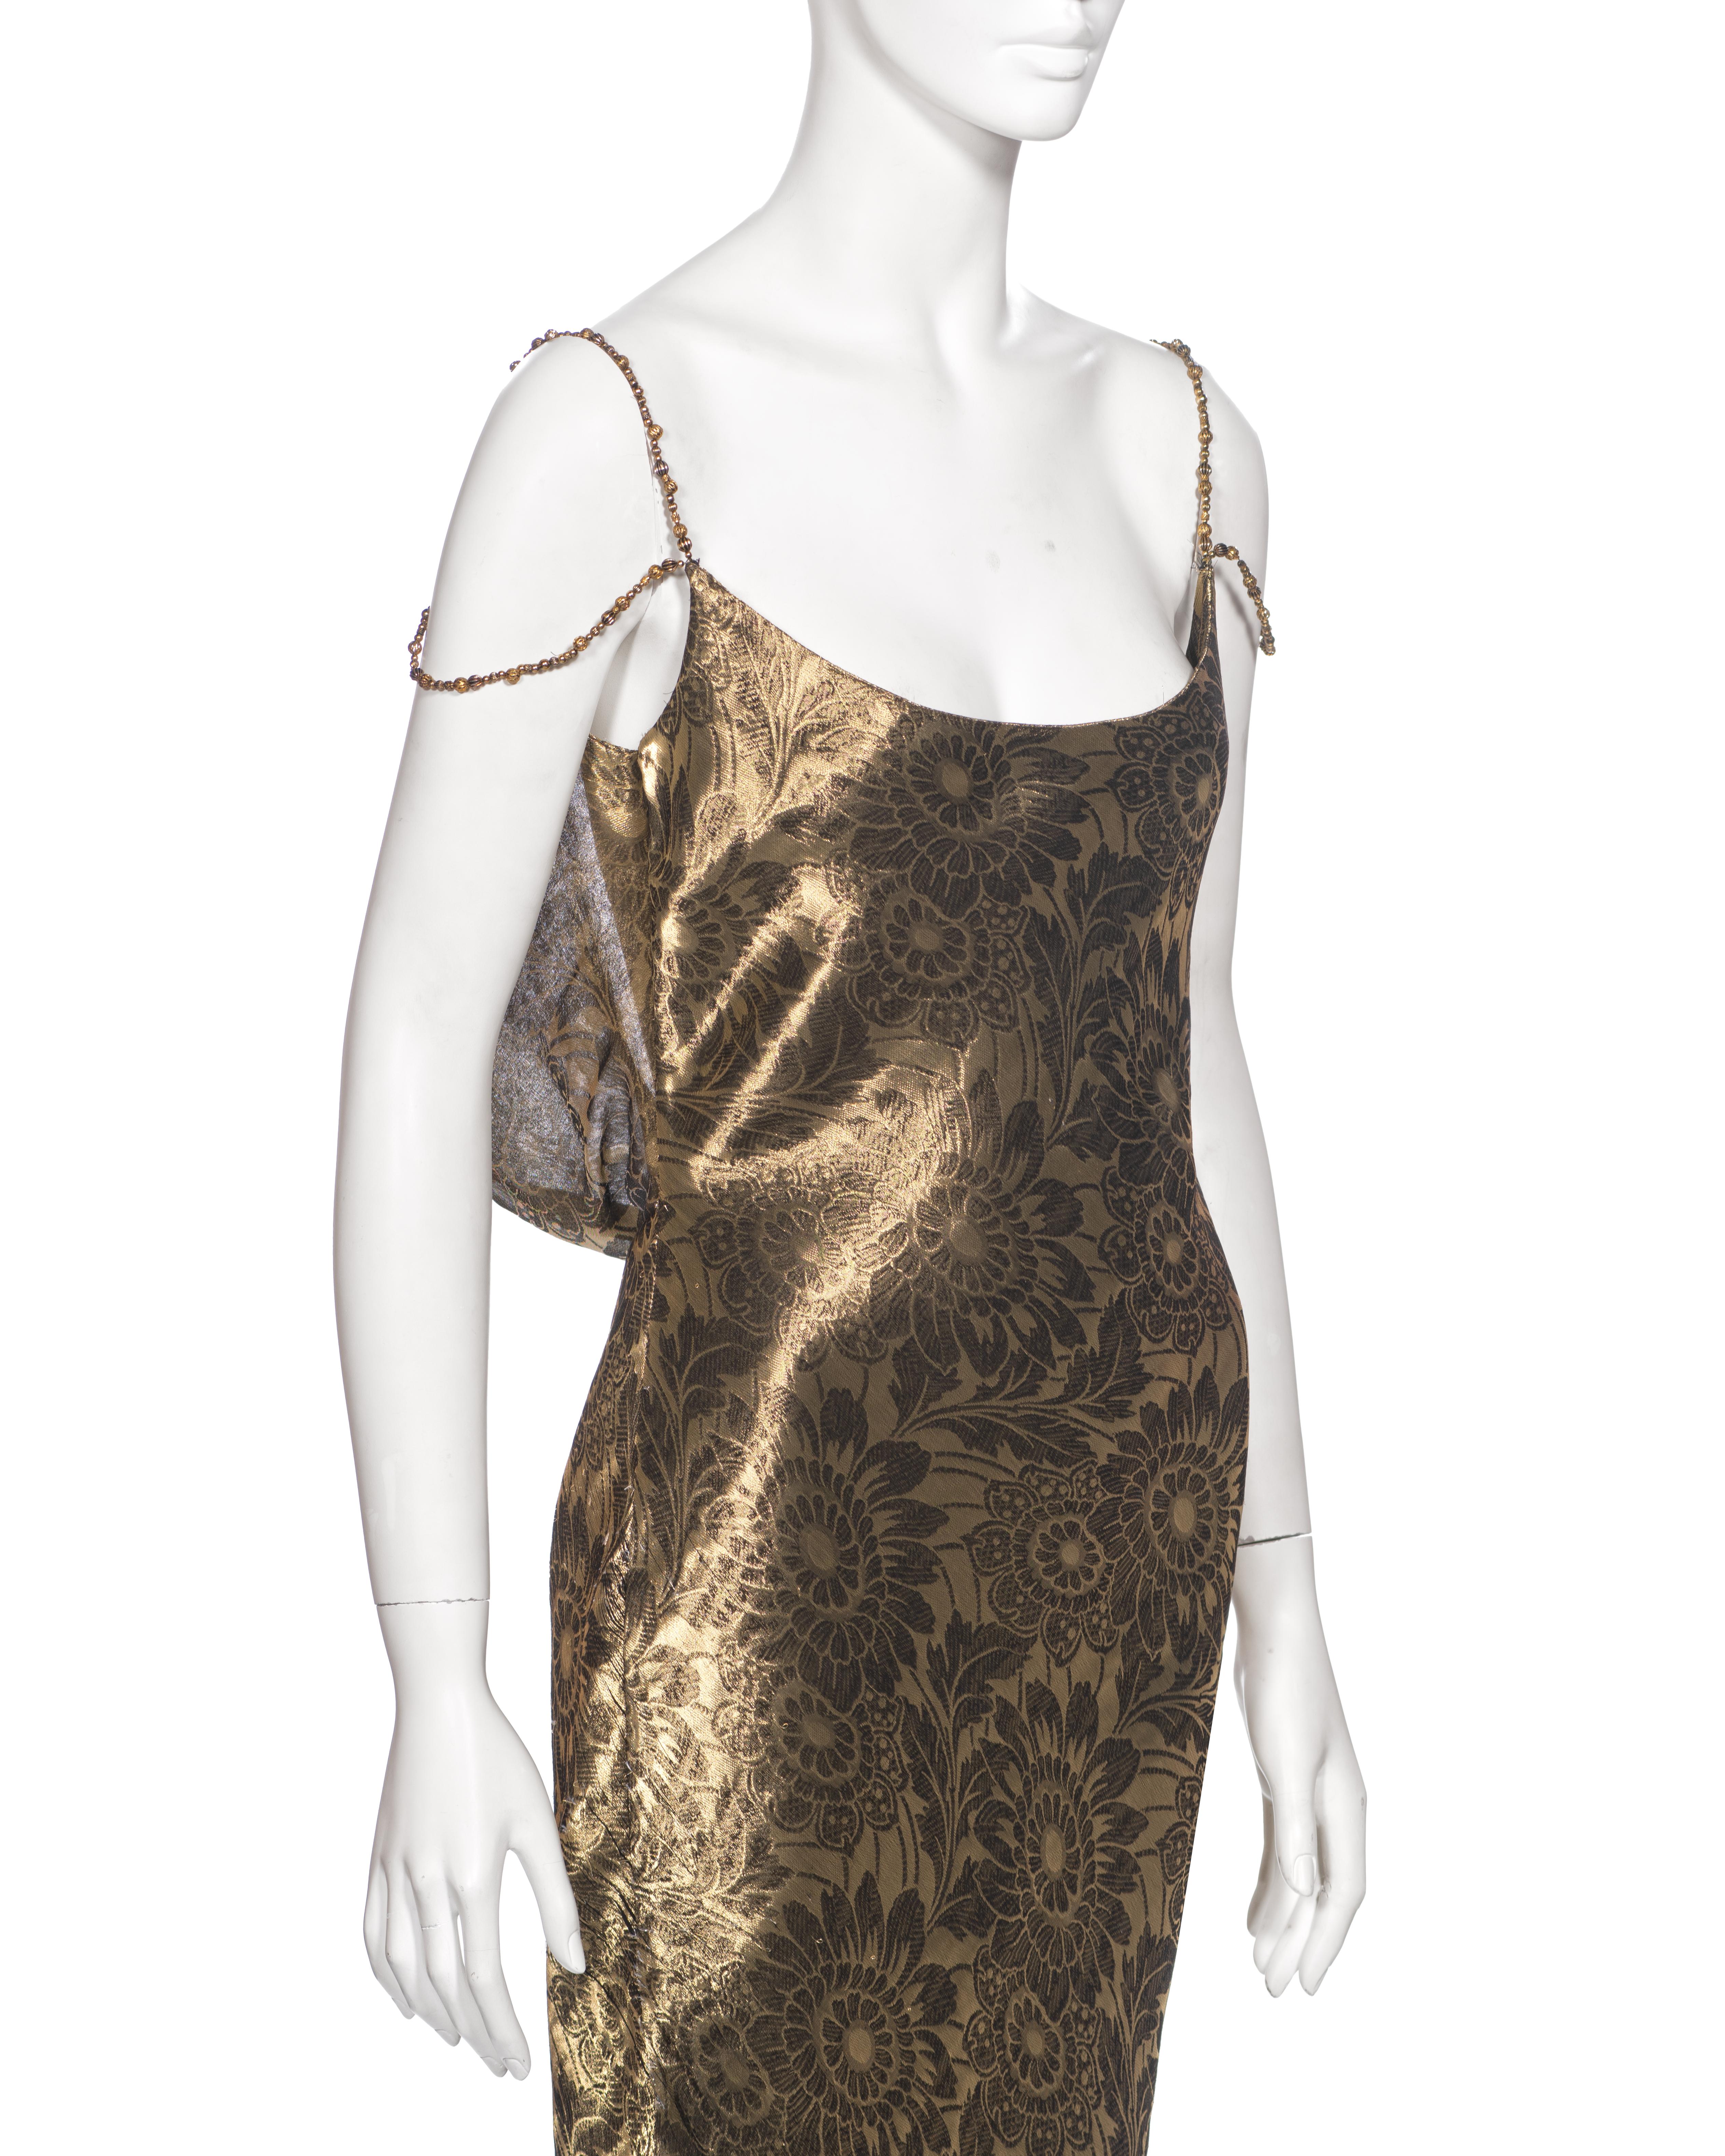 Christian Dior by John Galliano Metallic Antique Gold Evening Dress, FW 1998 For Sale 8